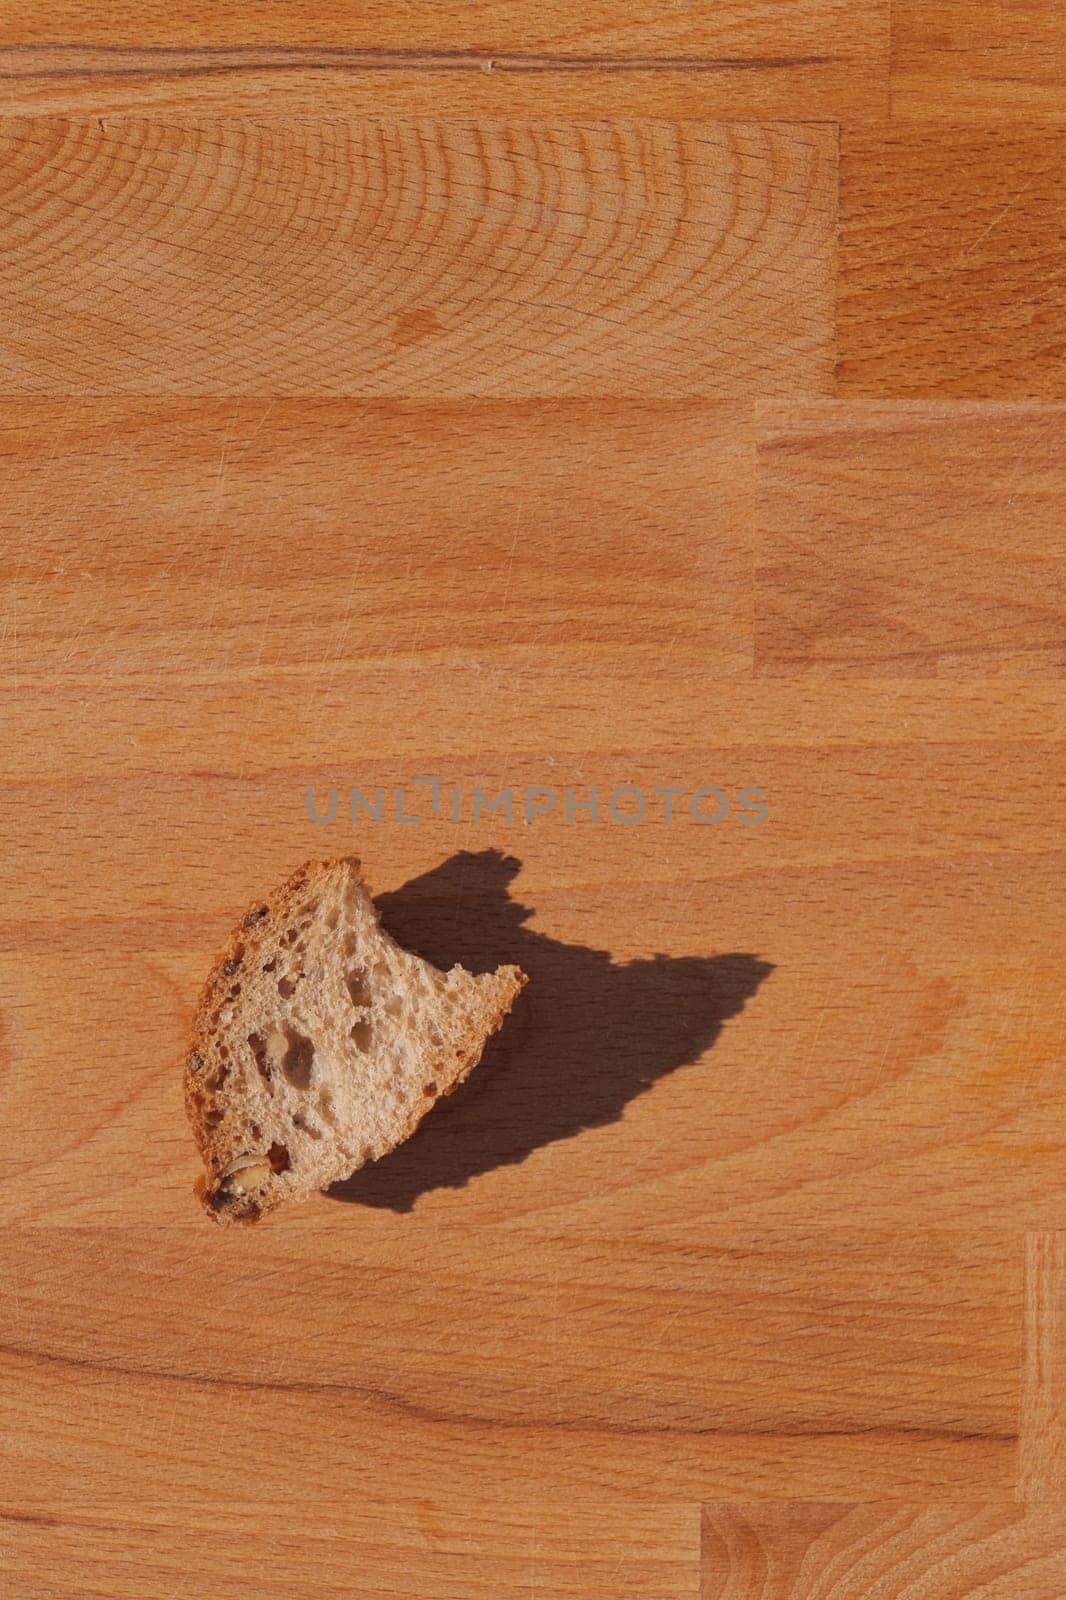 Sunlit Piece of Bread on Wooden Background by apavlin